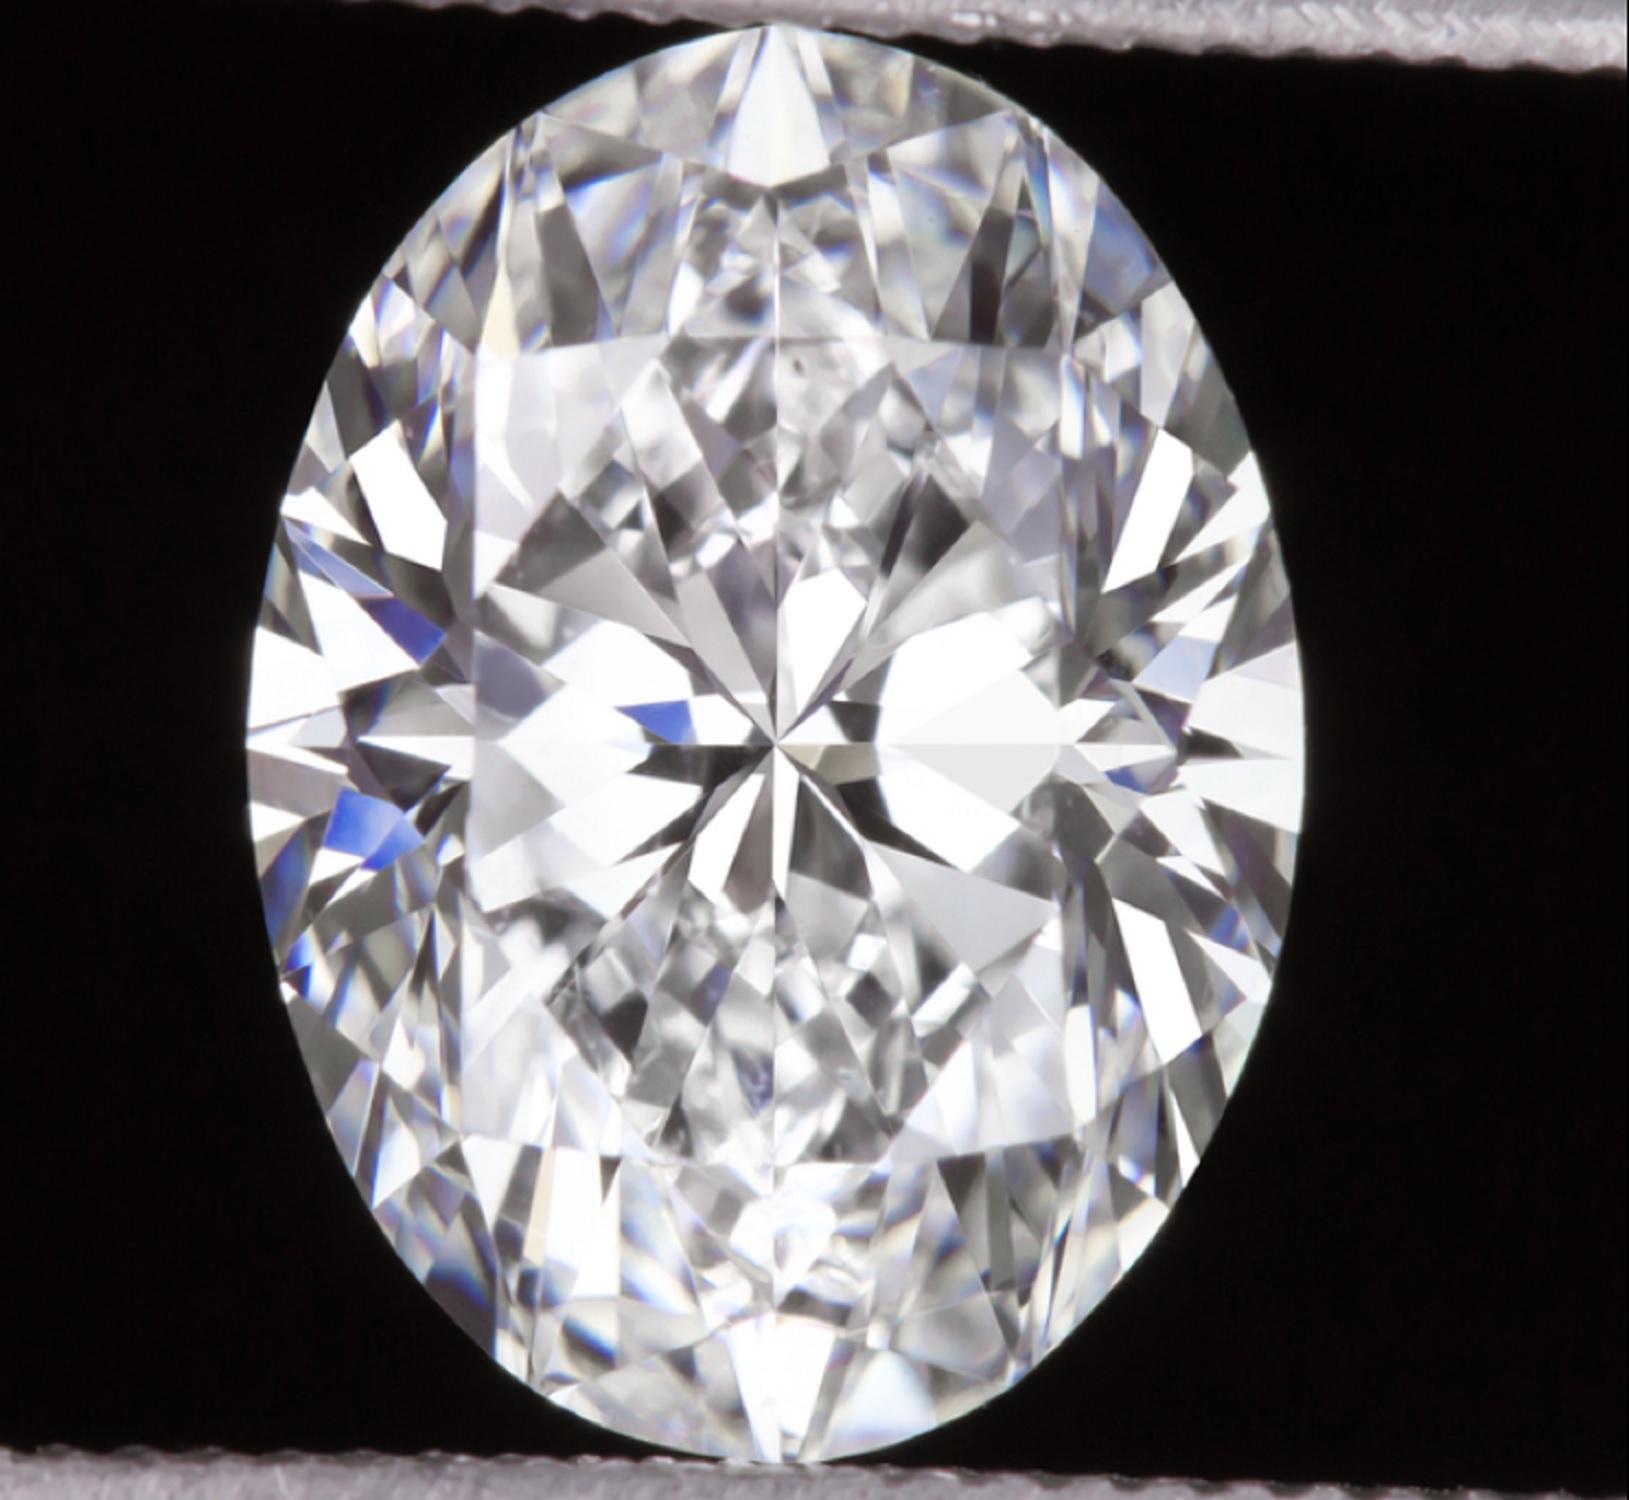 
Eye-catching and high quality 2.01ct GIA certified oval cut diamond has excellent F color, great SI1 clarity, and an absolutely fantastic cut! Oval cuts are one of the most fashionable and sought after diamond cuts, and this cut is phenomenally